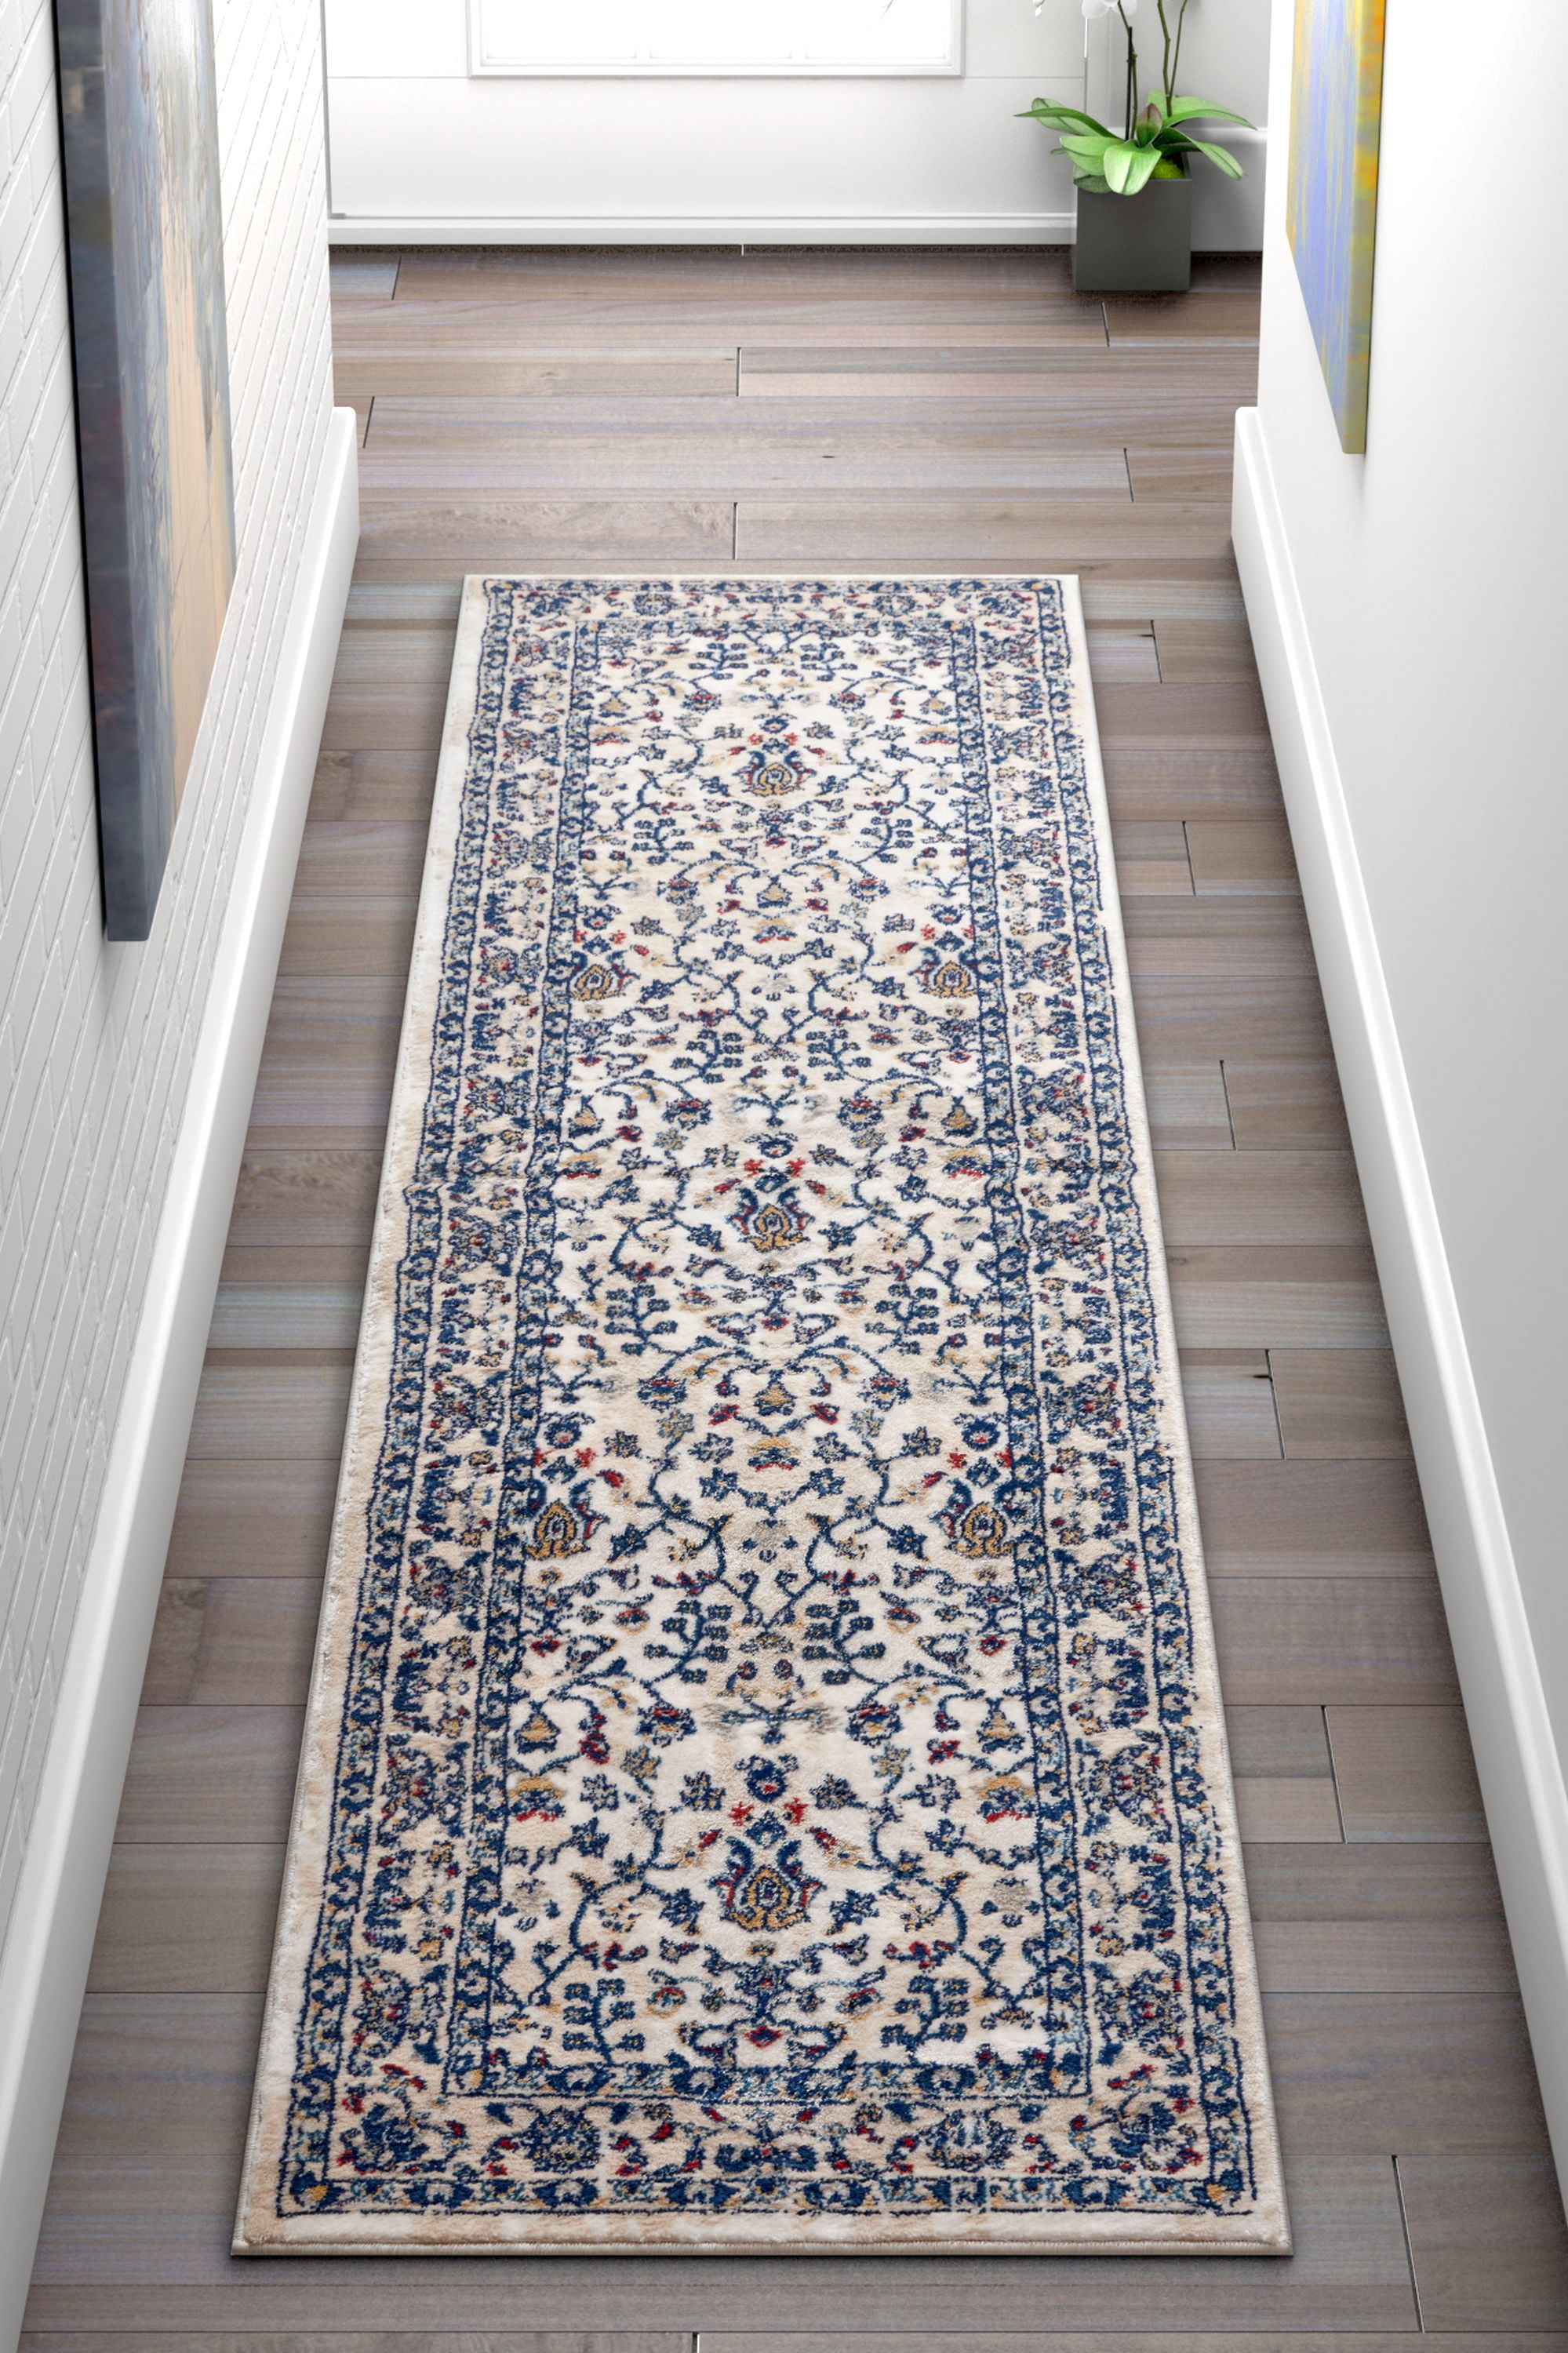 ELEGANT CLASSIC TRADITIONAL CHEAP KESHAN NEW AREA SMALL EXTRA LARGE RUGS RUNNERS 